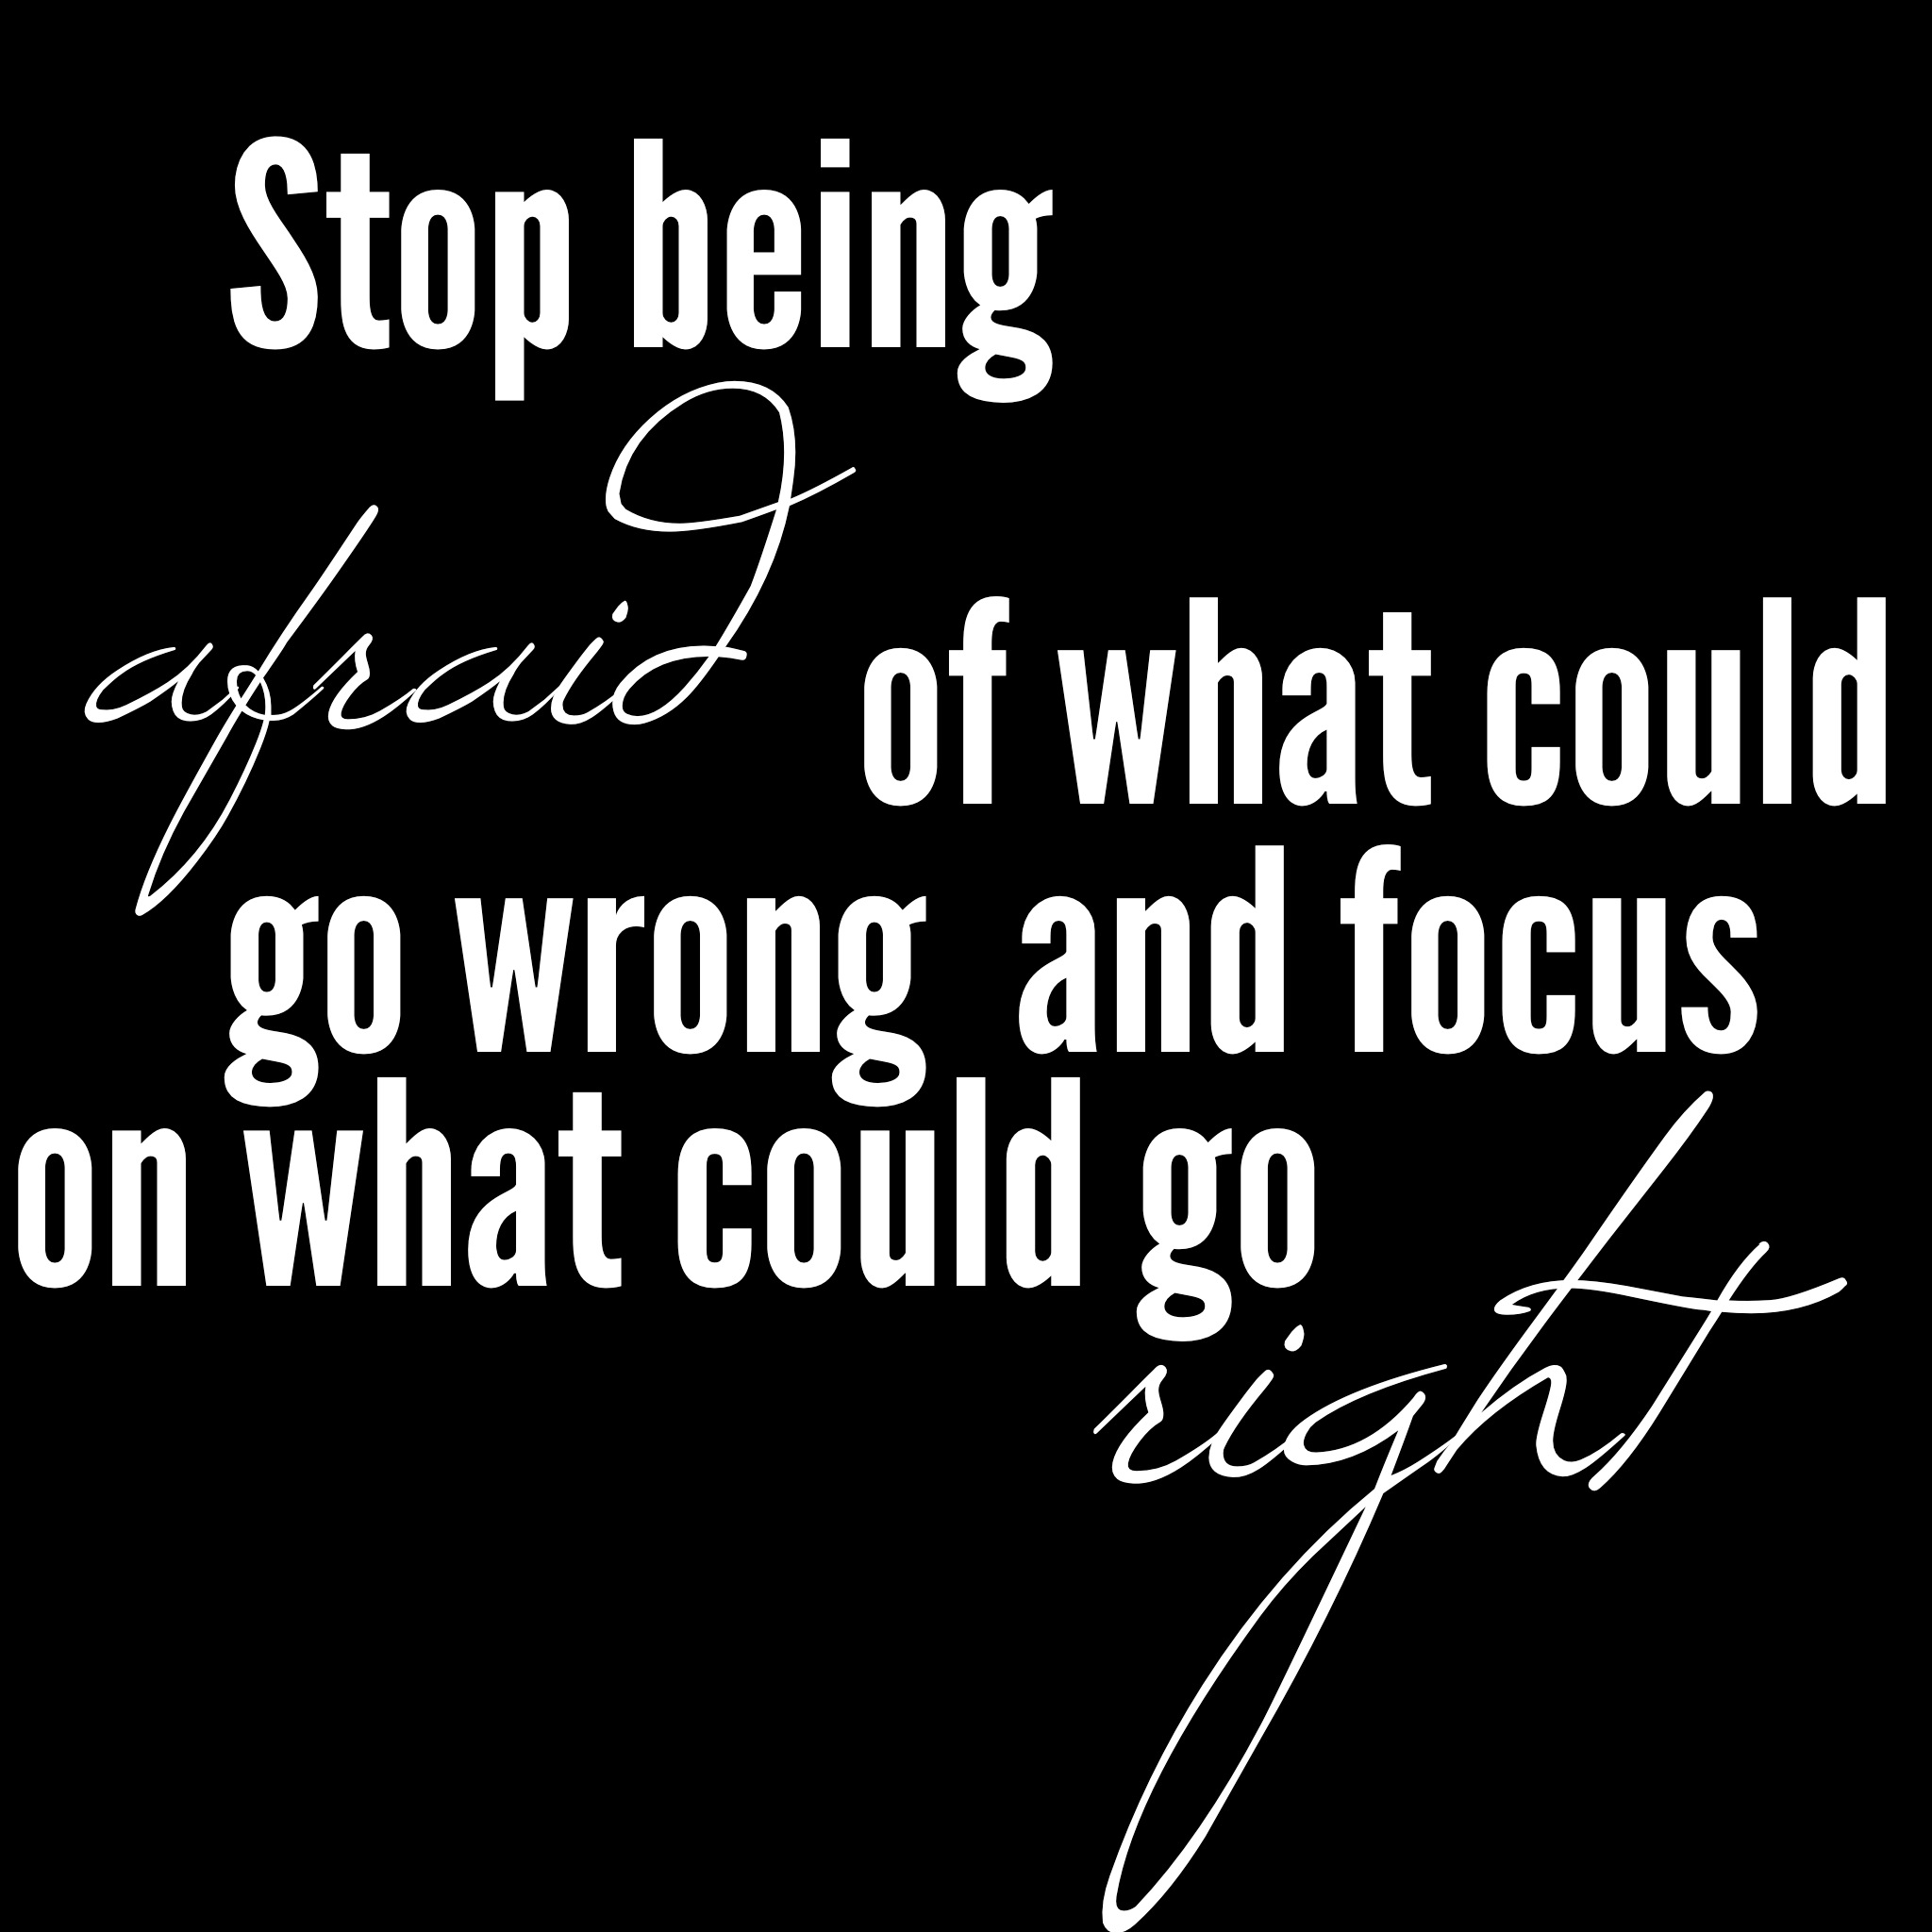 Stop being afraid of what could go wrong and focus on what could go right